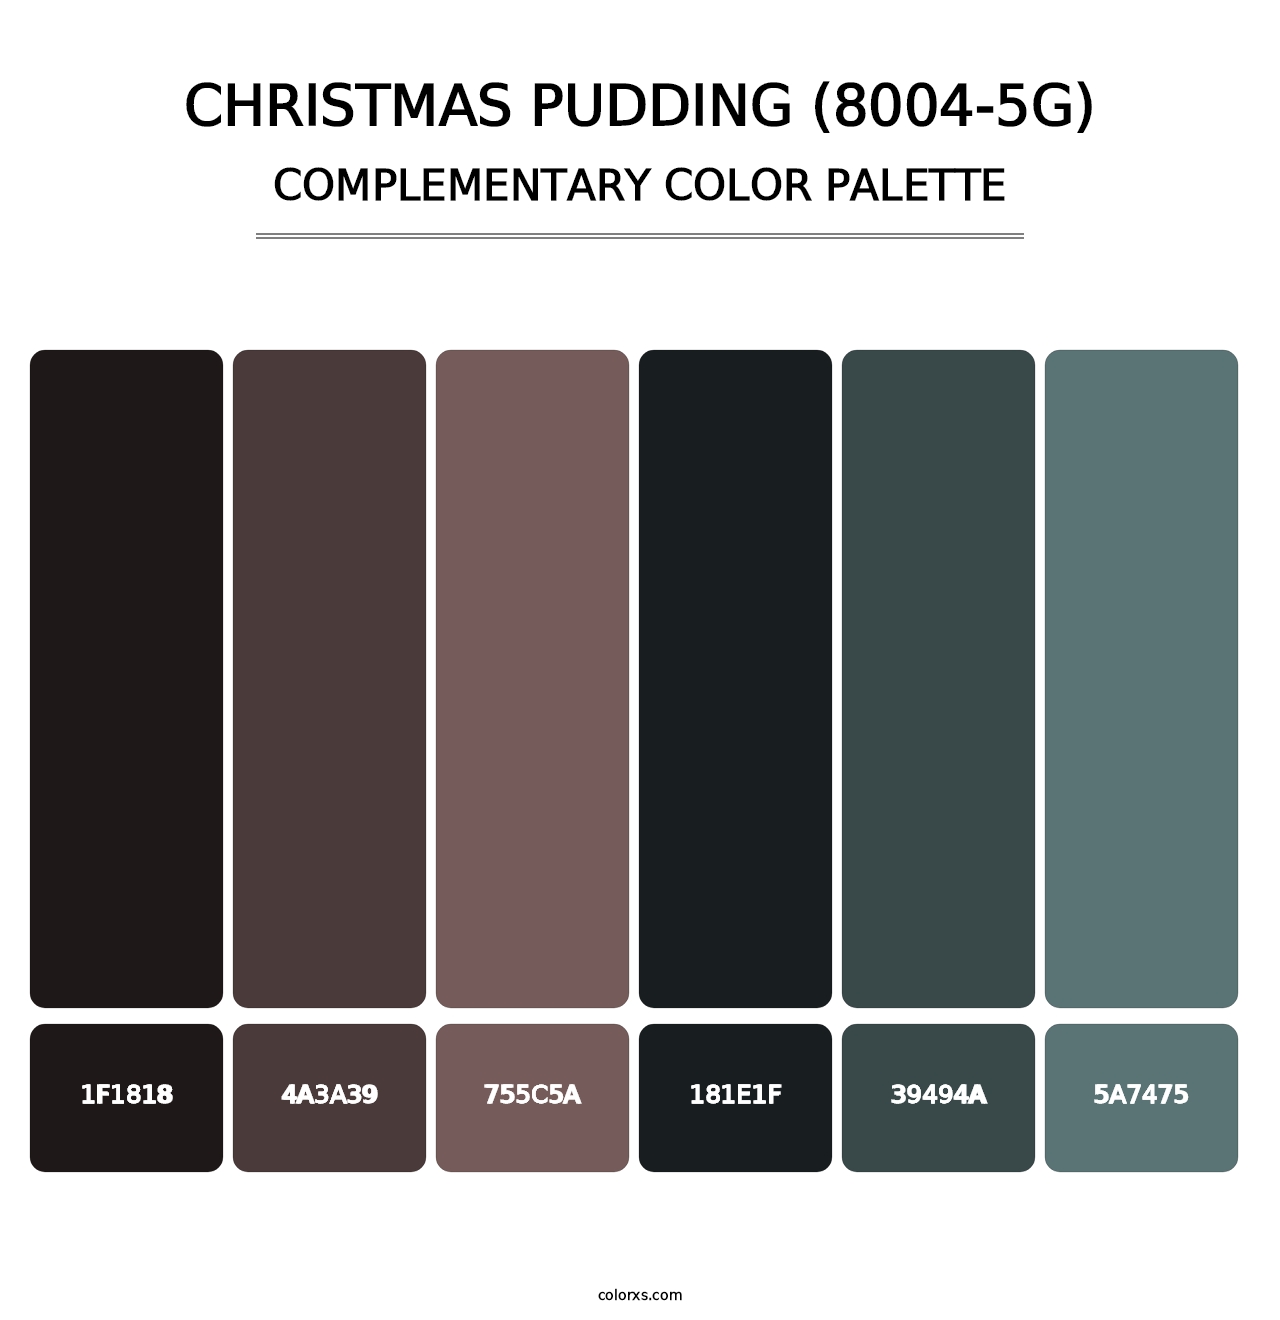 Christmas Pudding (8004-5G) - Complementary Color Palette